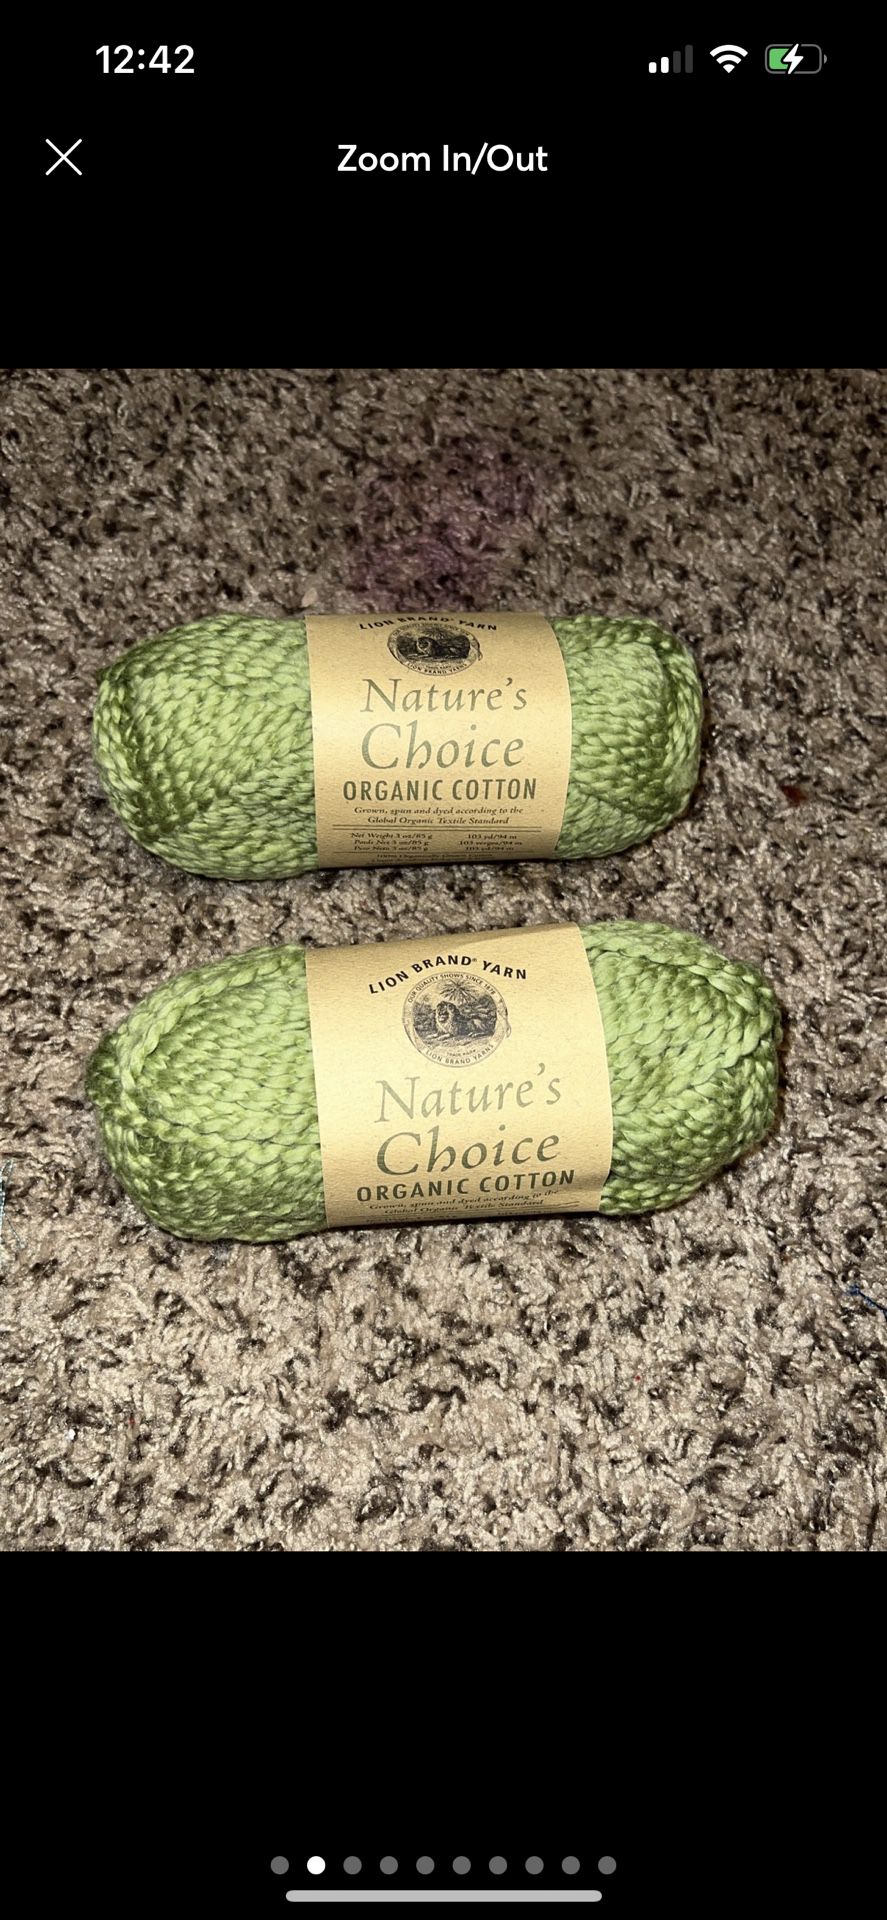 nature's choice organic cotton yarn for Sale in Tucson, AZ - OfferUp